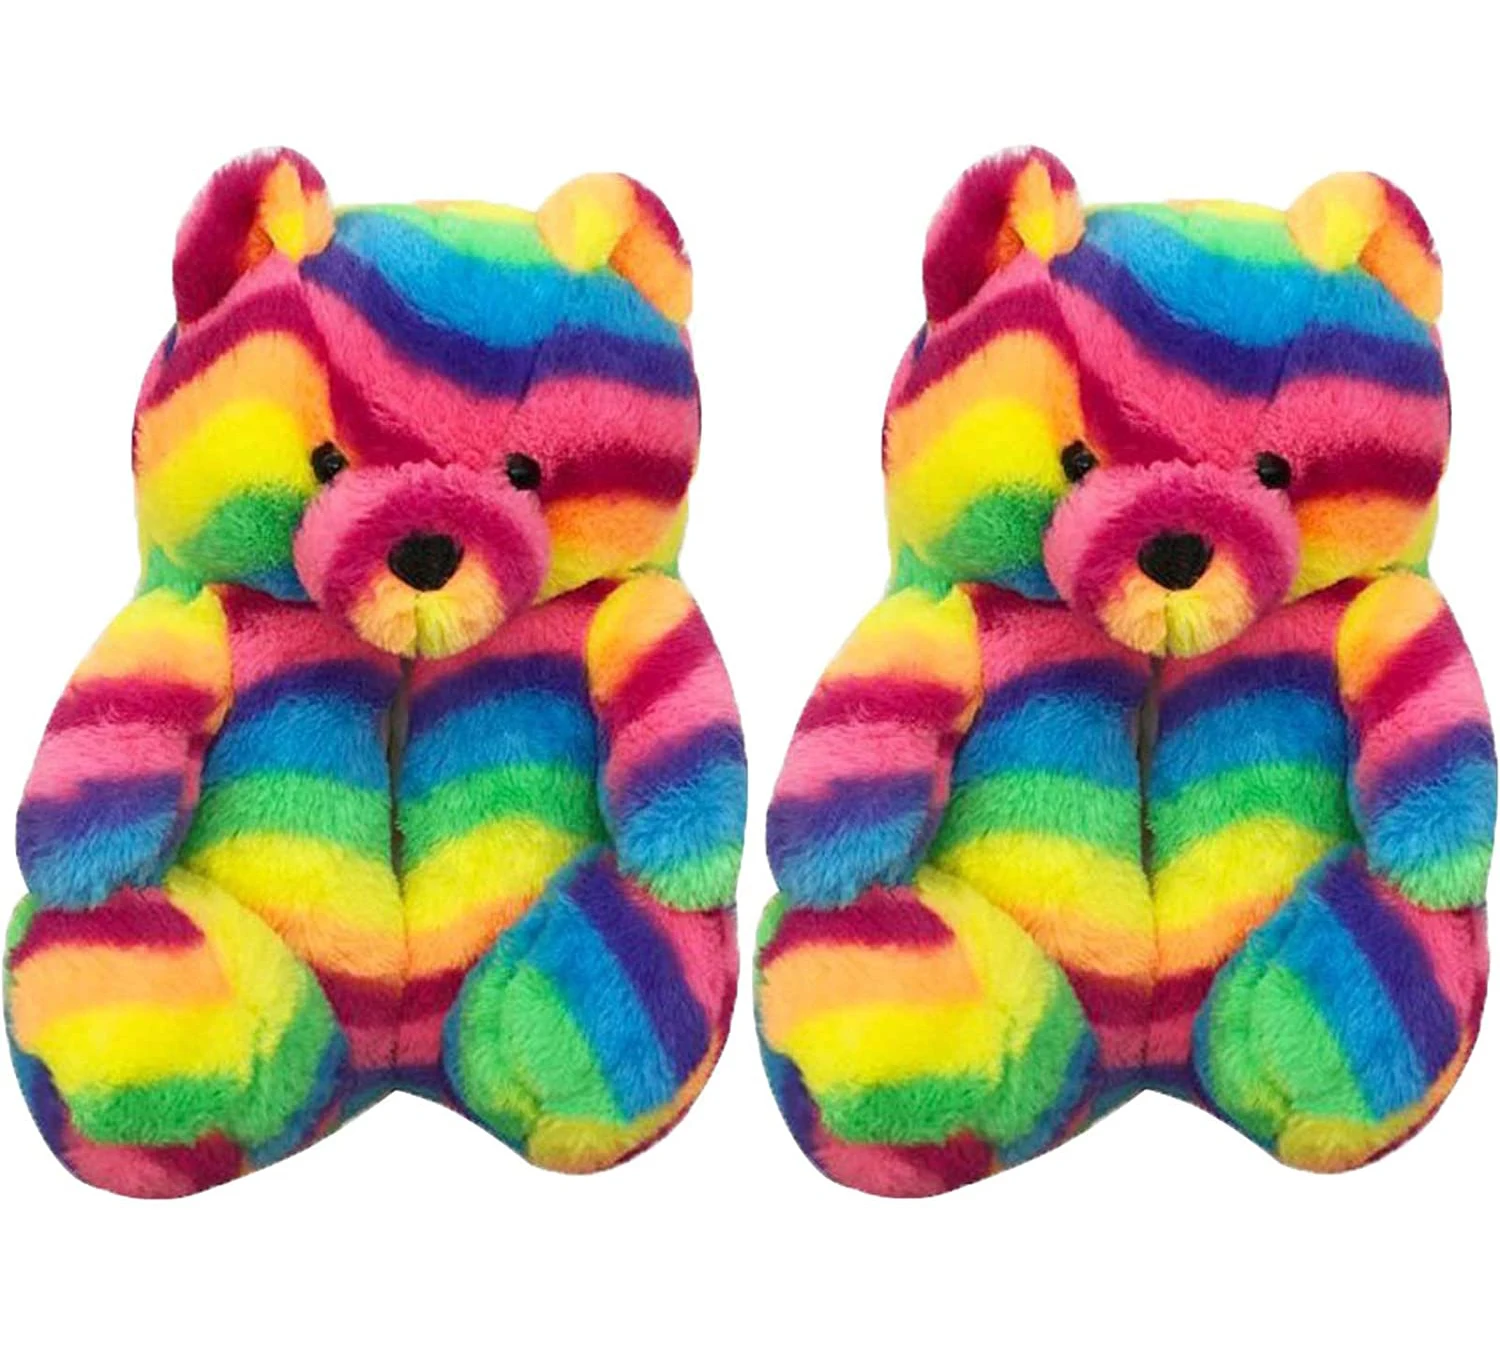 

Teddy Bear Slippers New Arrivals Fuzzy Teddy Wholesale Plush New Style Slippers House Teddy Bear Slippers For Women Girls, Blue, pink, black red, colors, khaki, brown, rainbow